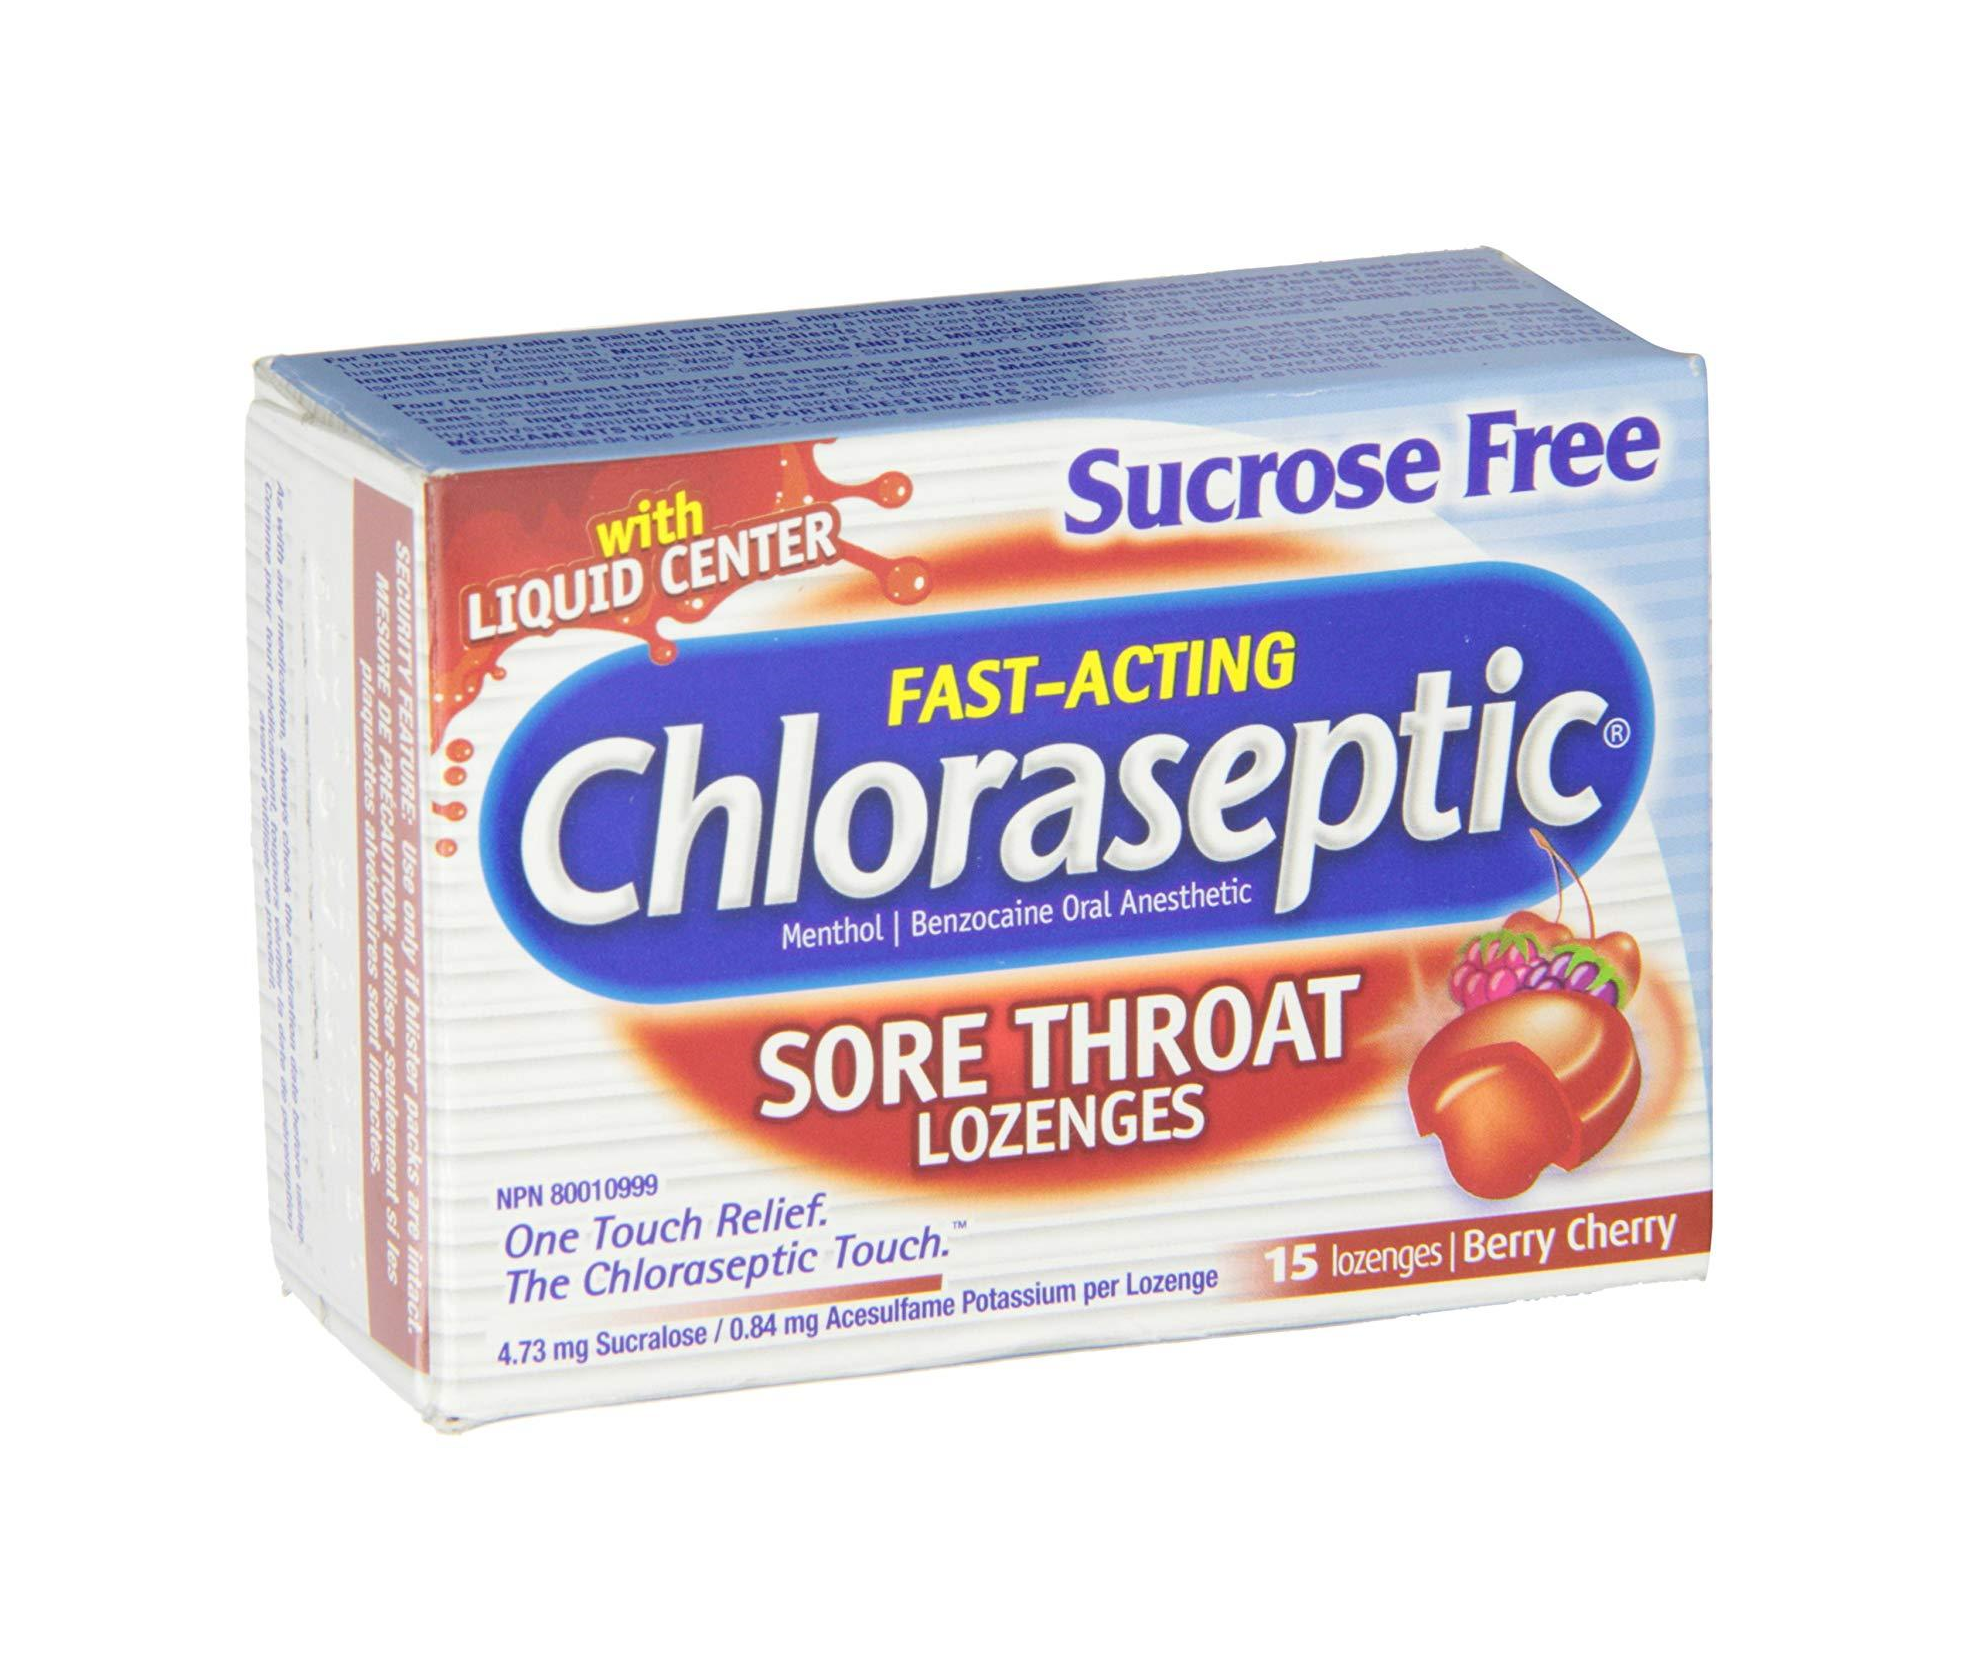 Chloraseptic Sore Throat Lozenges Sucrose Free Berry Cherry Flavour 15 Lozenges